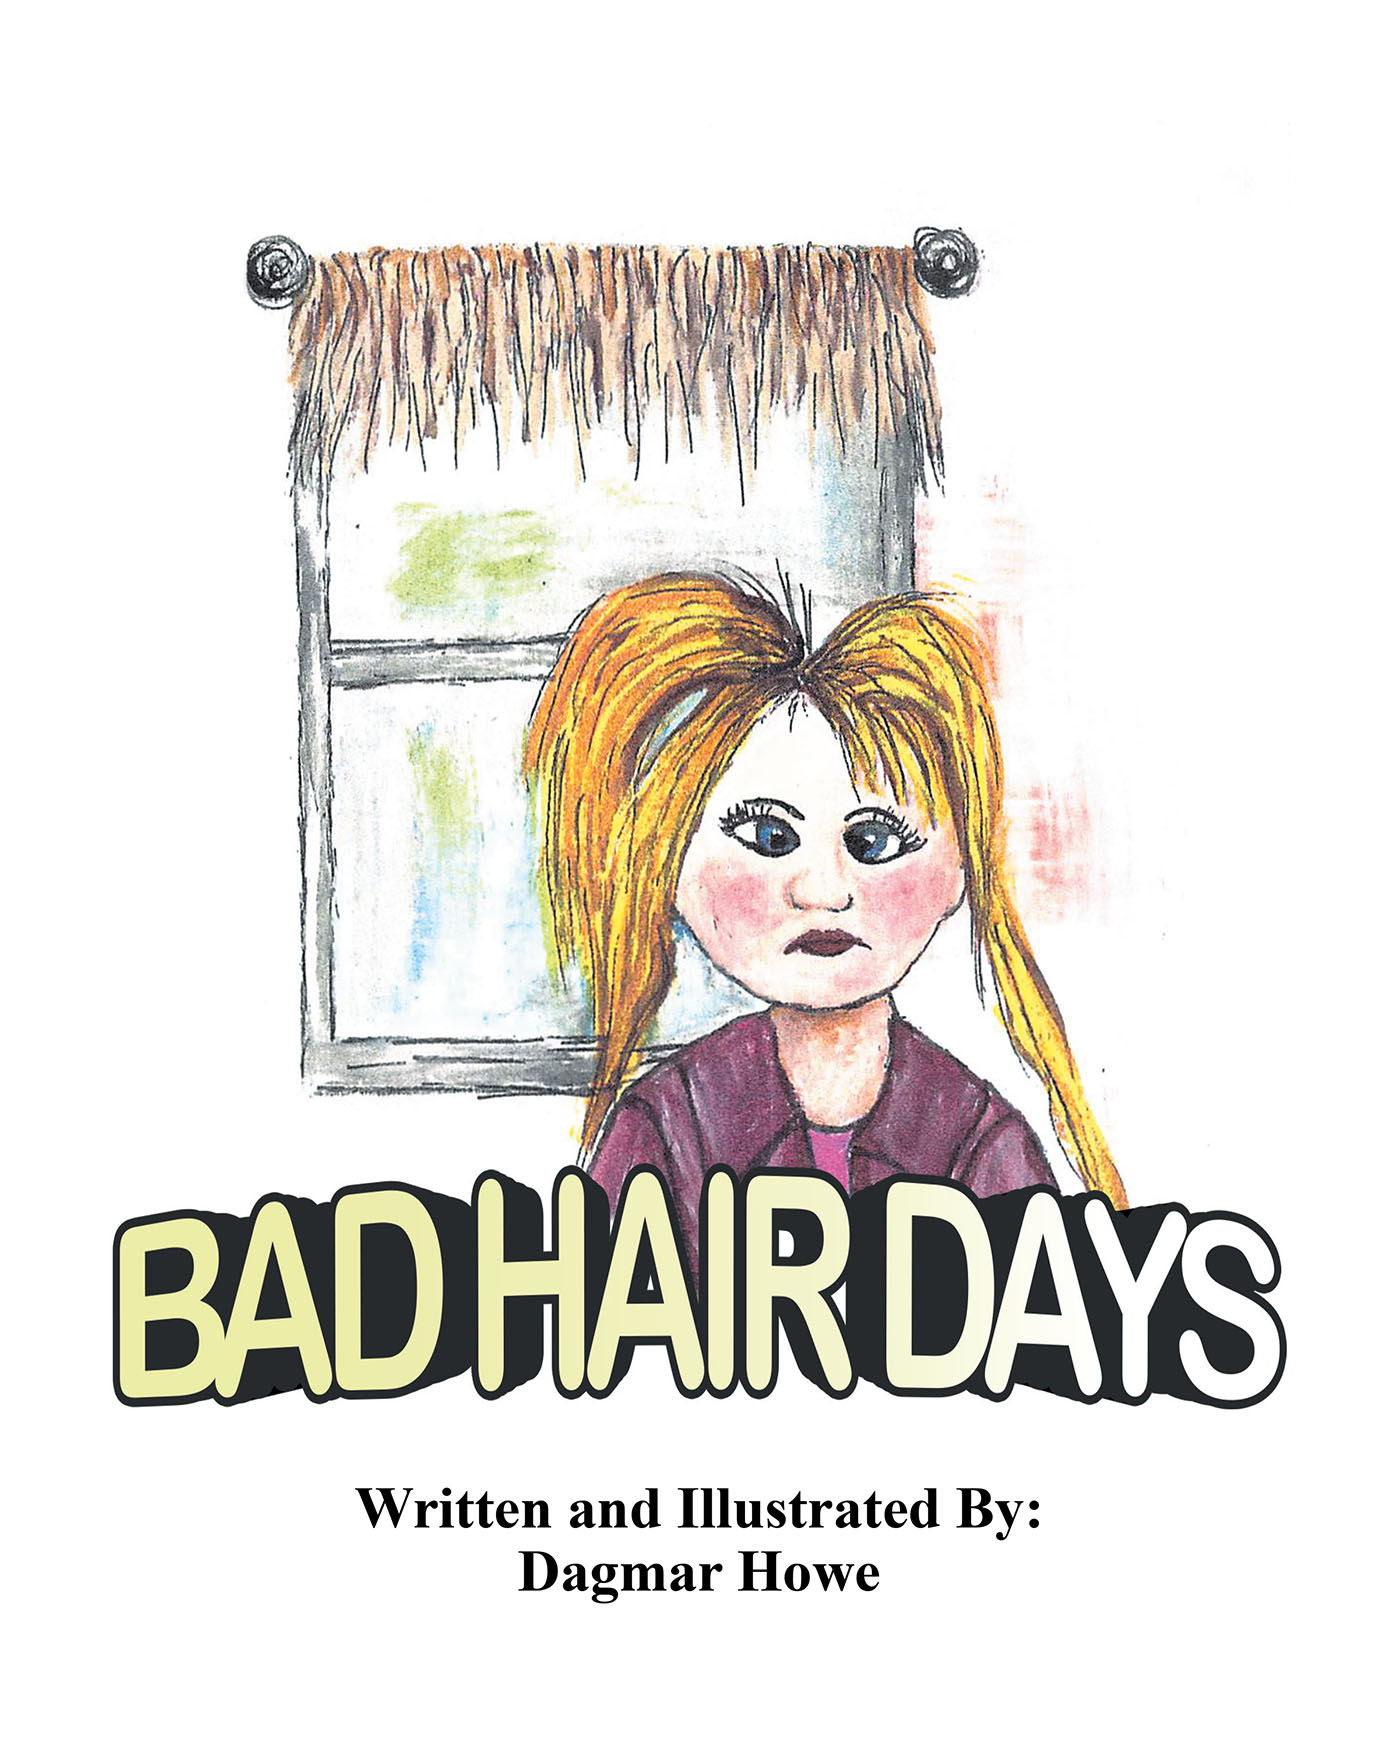 Author Dagmar Howe’s New Book, "Bad Hair Days," Helps Children to Realize That Dad’s Opinion Counts, Too, Even When There Are Days with Unruly Hair